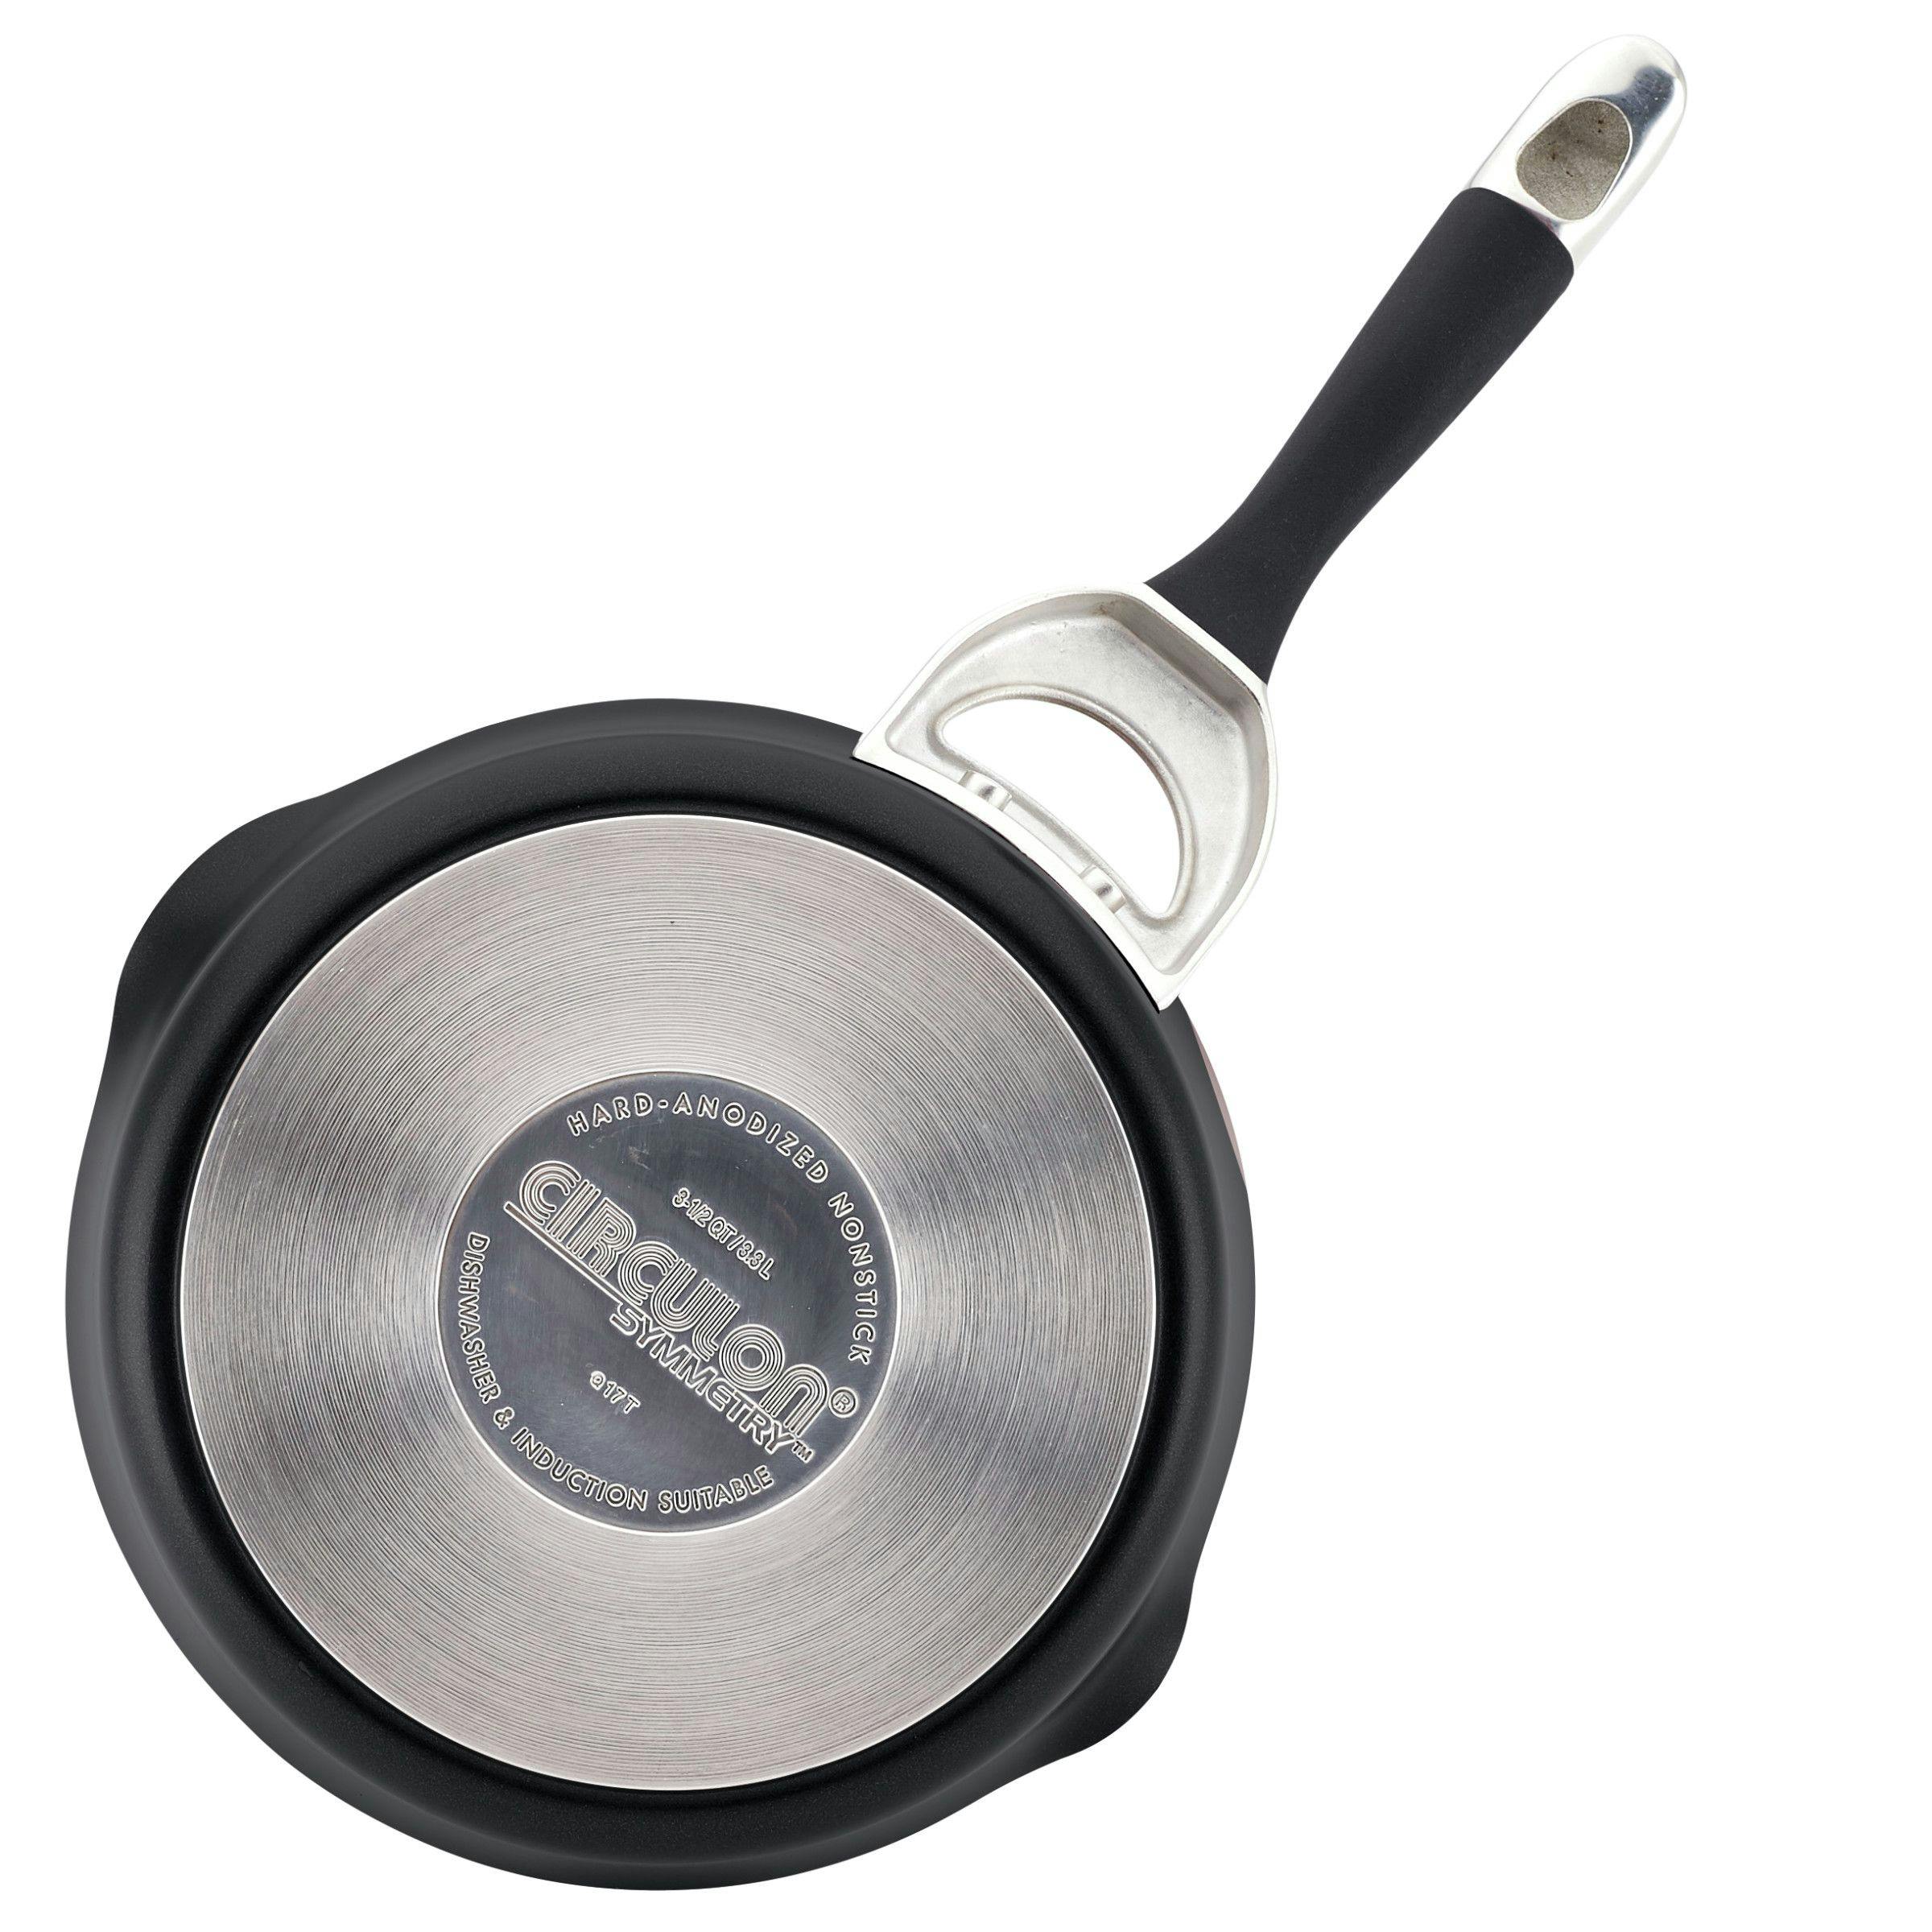 Circulon Symmetry Hard-Anodized Nonstick Skillets, Set of Two